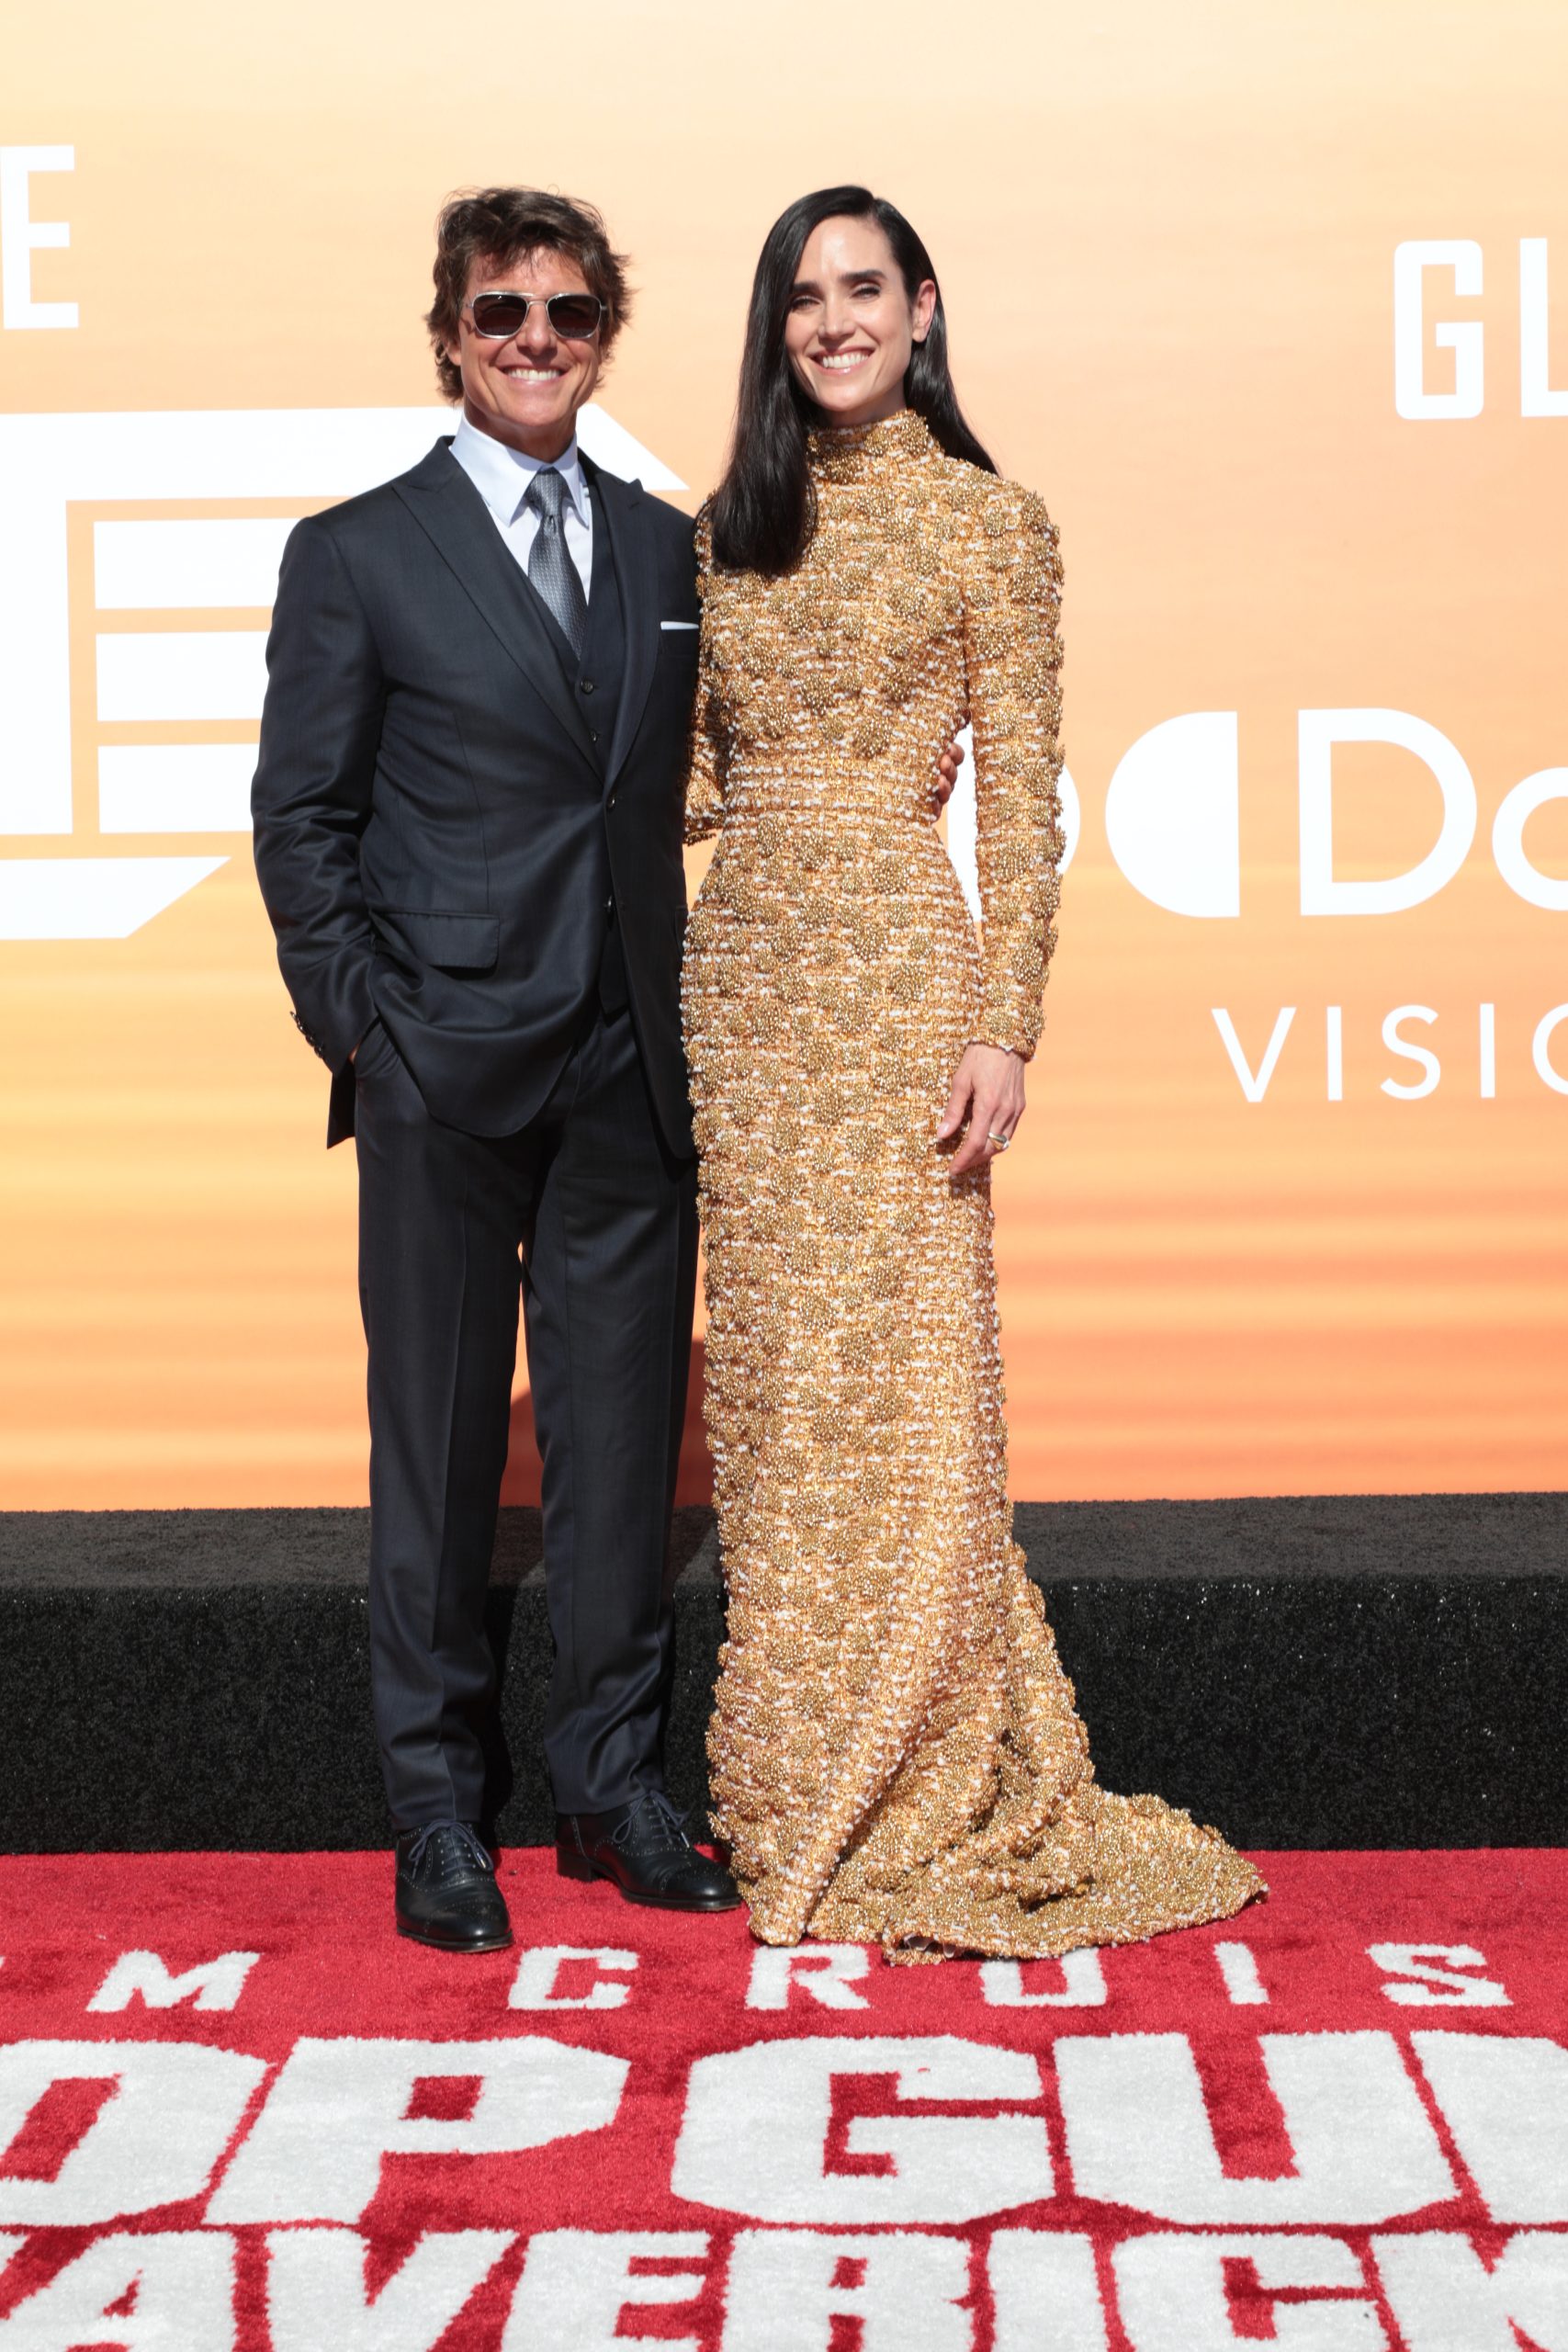 Jennifer Connelly Glows In Gold Gown At 'Top Gun: Maverick' Premiere –  Footwear News